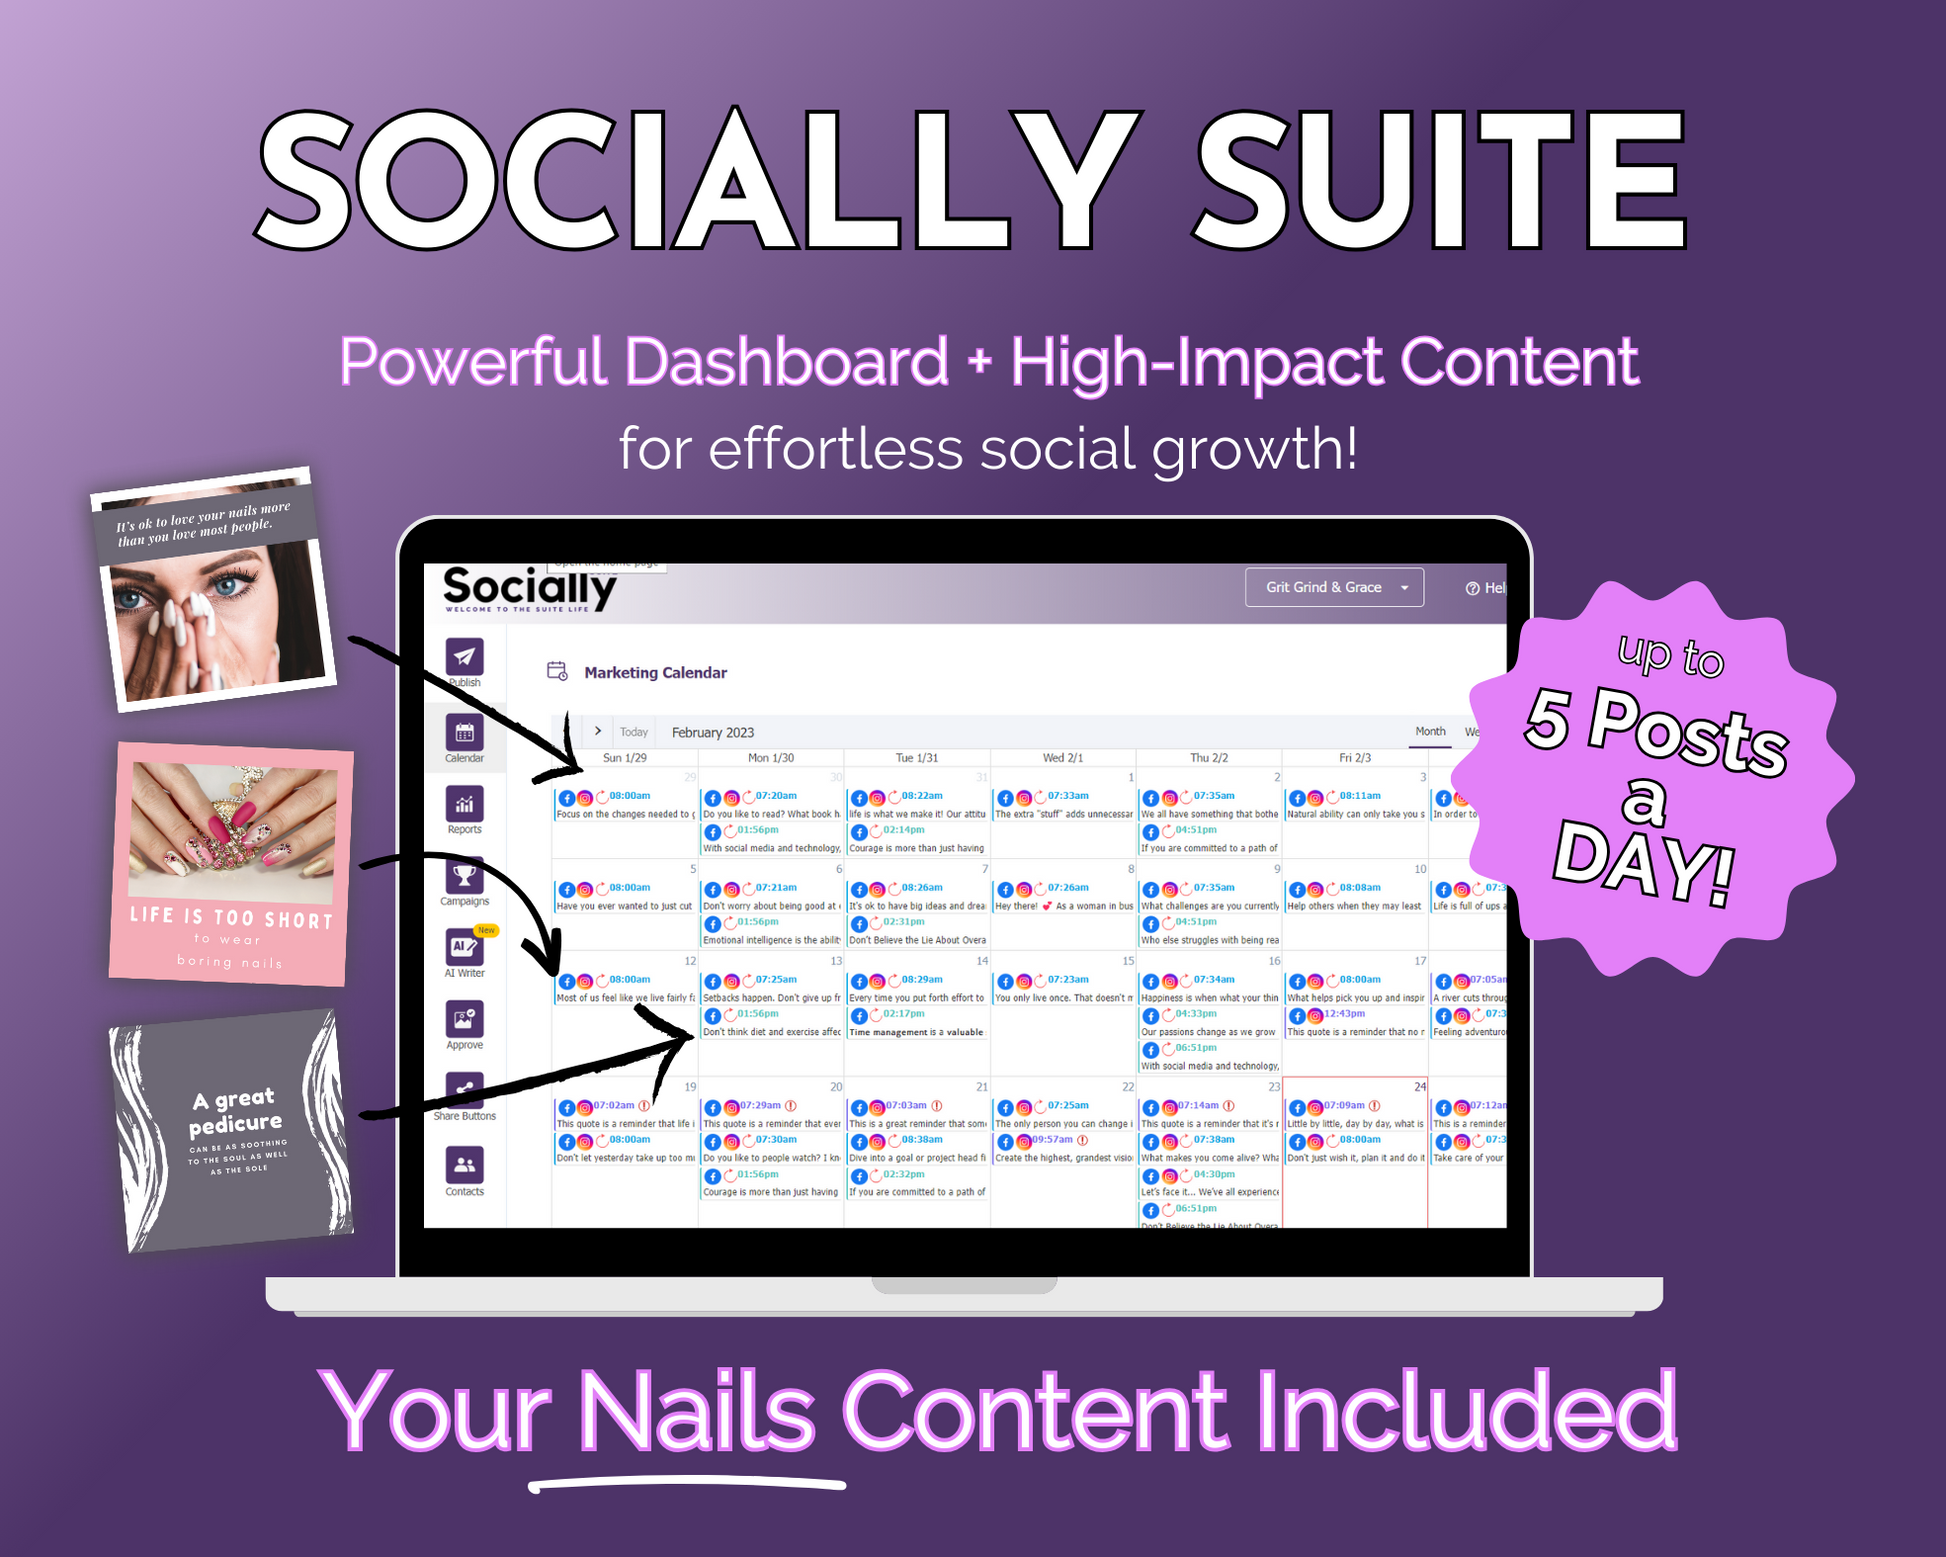 A Get Socially Inclined Socially Suite Membership laptop designed for enhancing online presence and social media marketing. It includes powerful tools for content management.